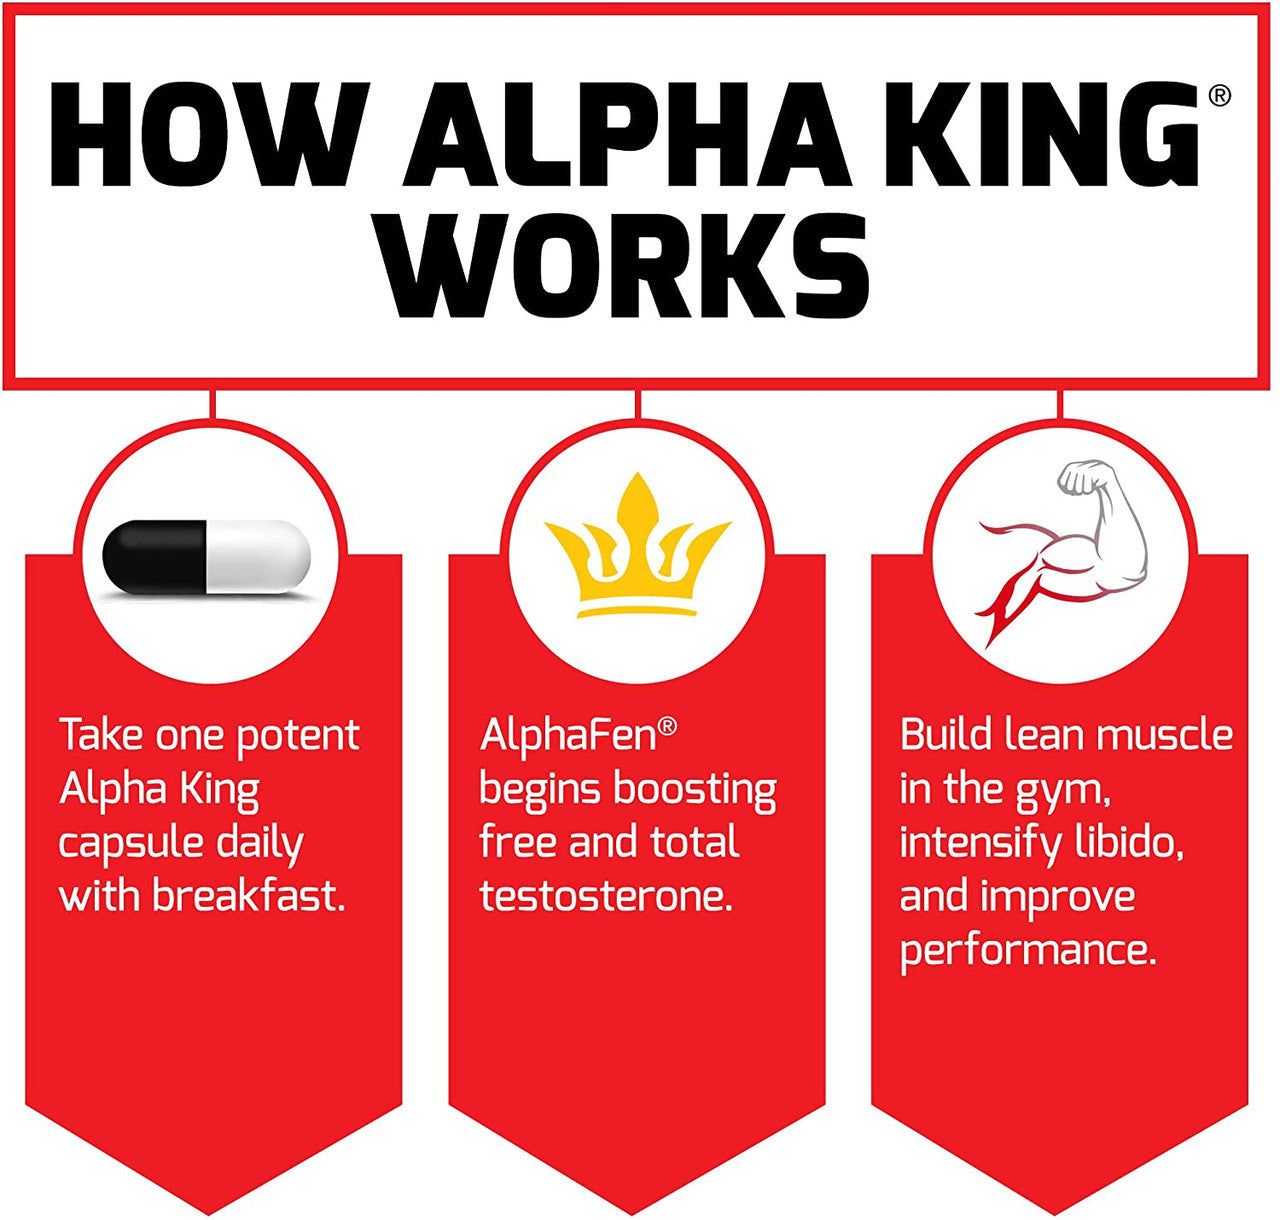 Force Factor Alpha King how it works